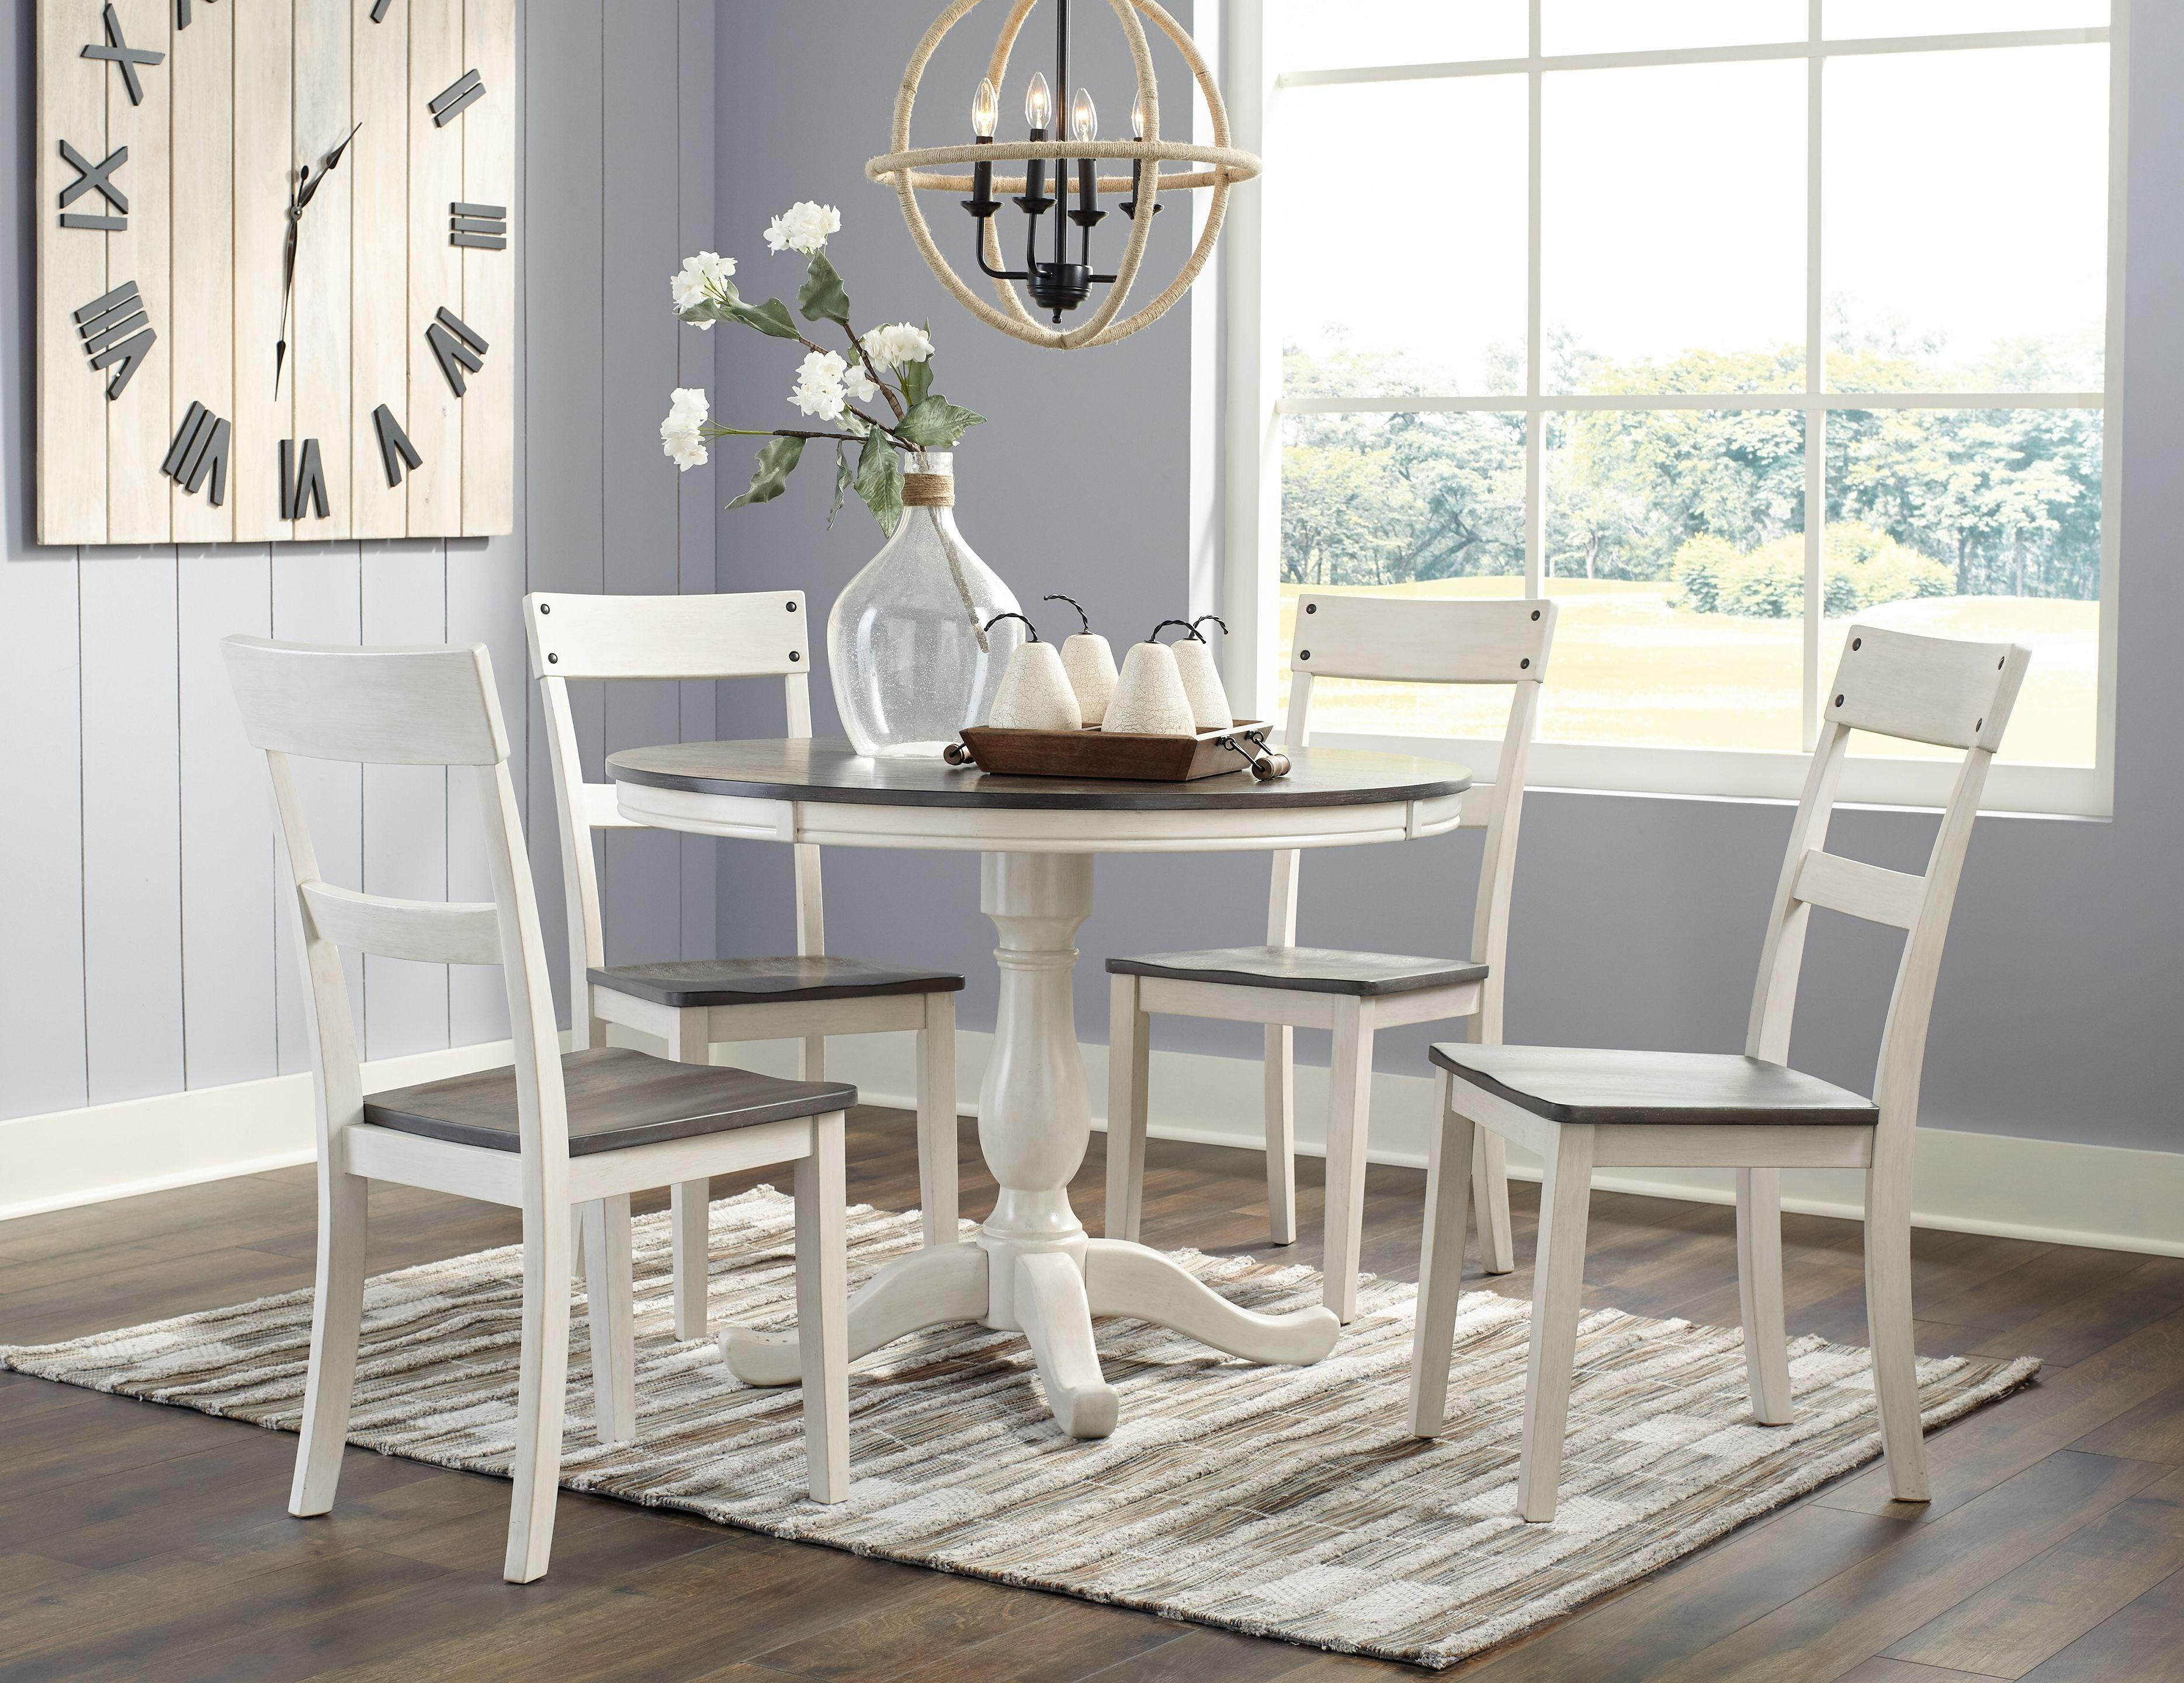 Signature Design by Ashley® - Nelling - White / Brown / Beige - 6 Pc. - Dining Room Table, 4 Side Chairs - 5th Avenue Furniture